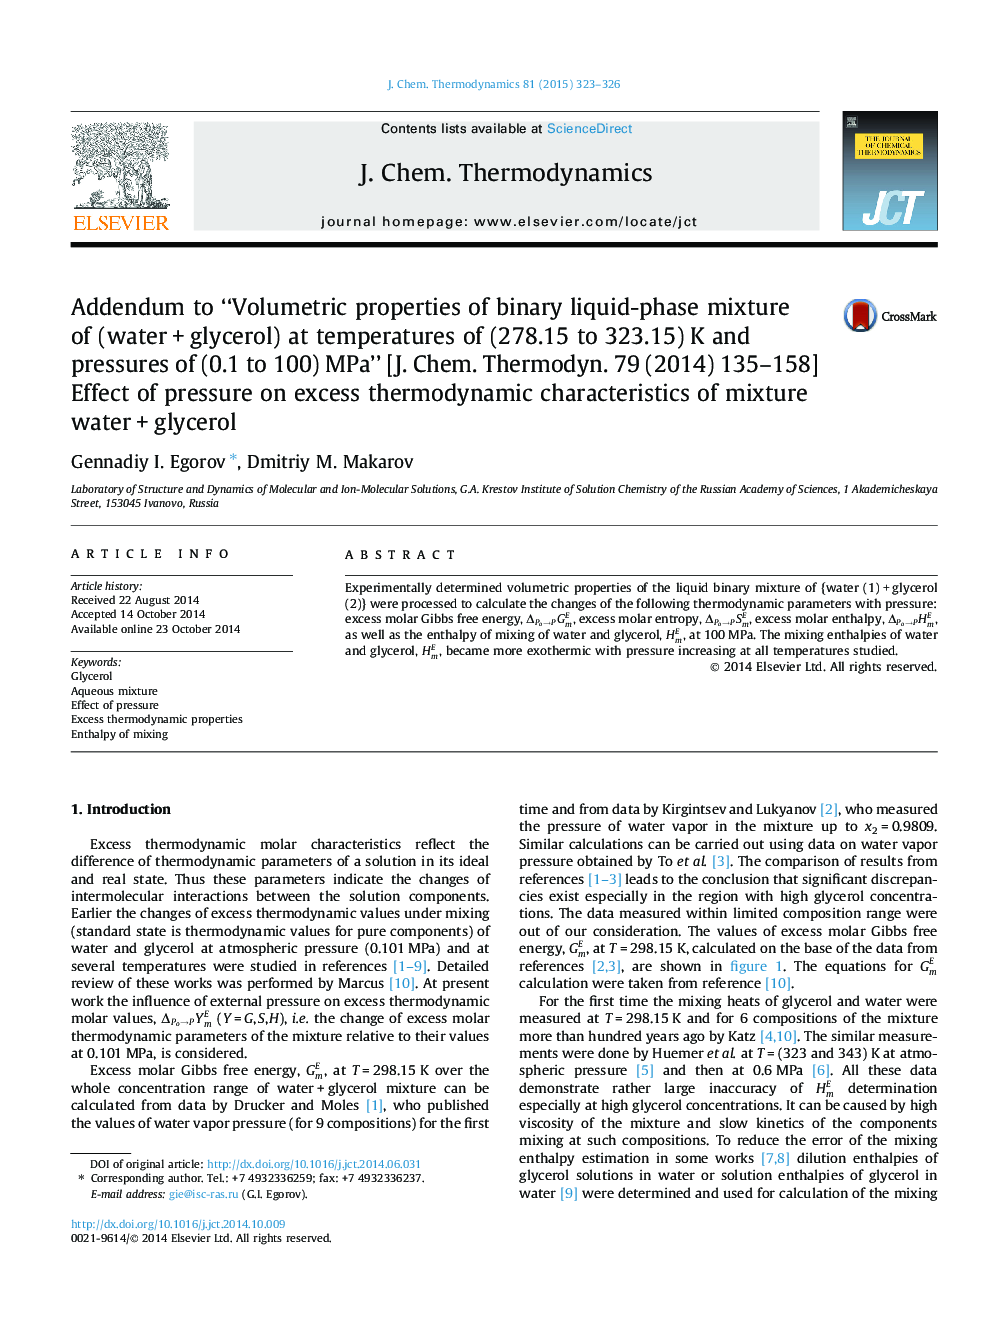 Addendum to “Volumetric properties of binary liquid-phase mixture of (waterÂ +Â glycerol) at temperatures of (278.15 to 323.15)Â K and pressures of (0.1 to 100)Â MPa” [J. Chem. Thermodyn. 79 (2014) 135-158]